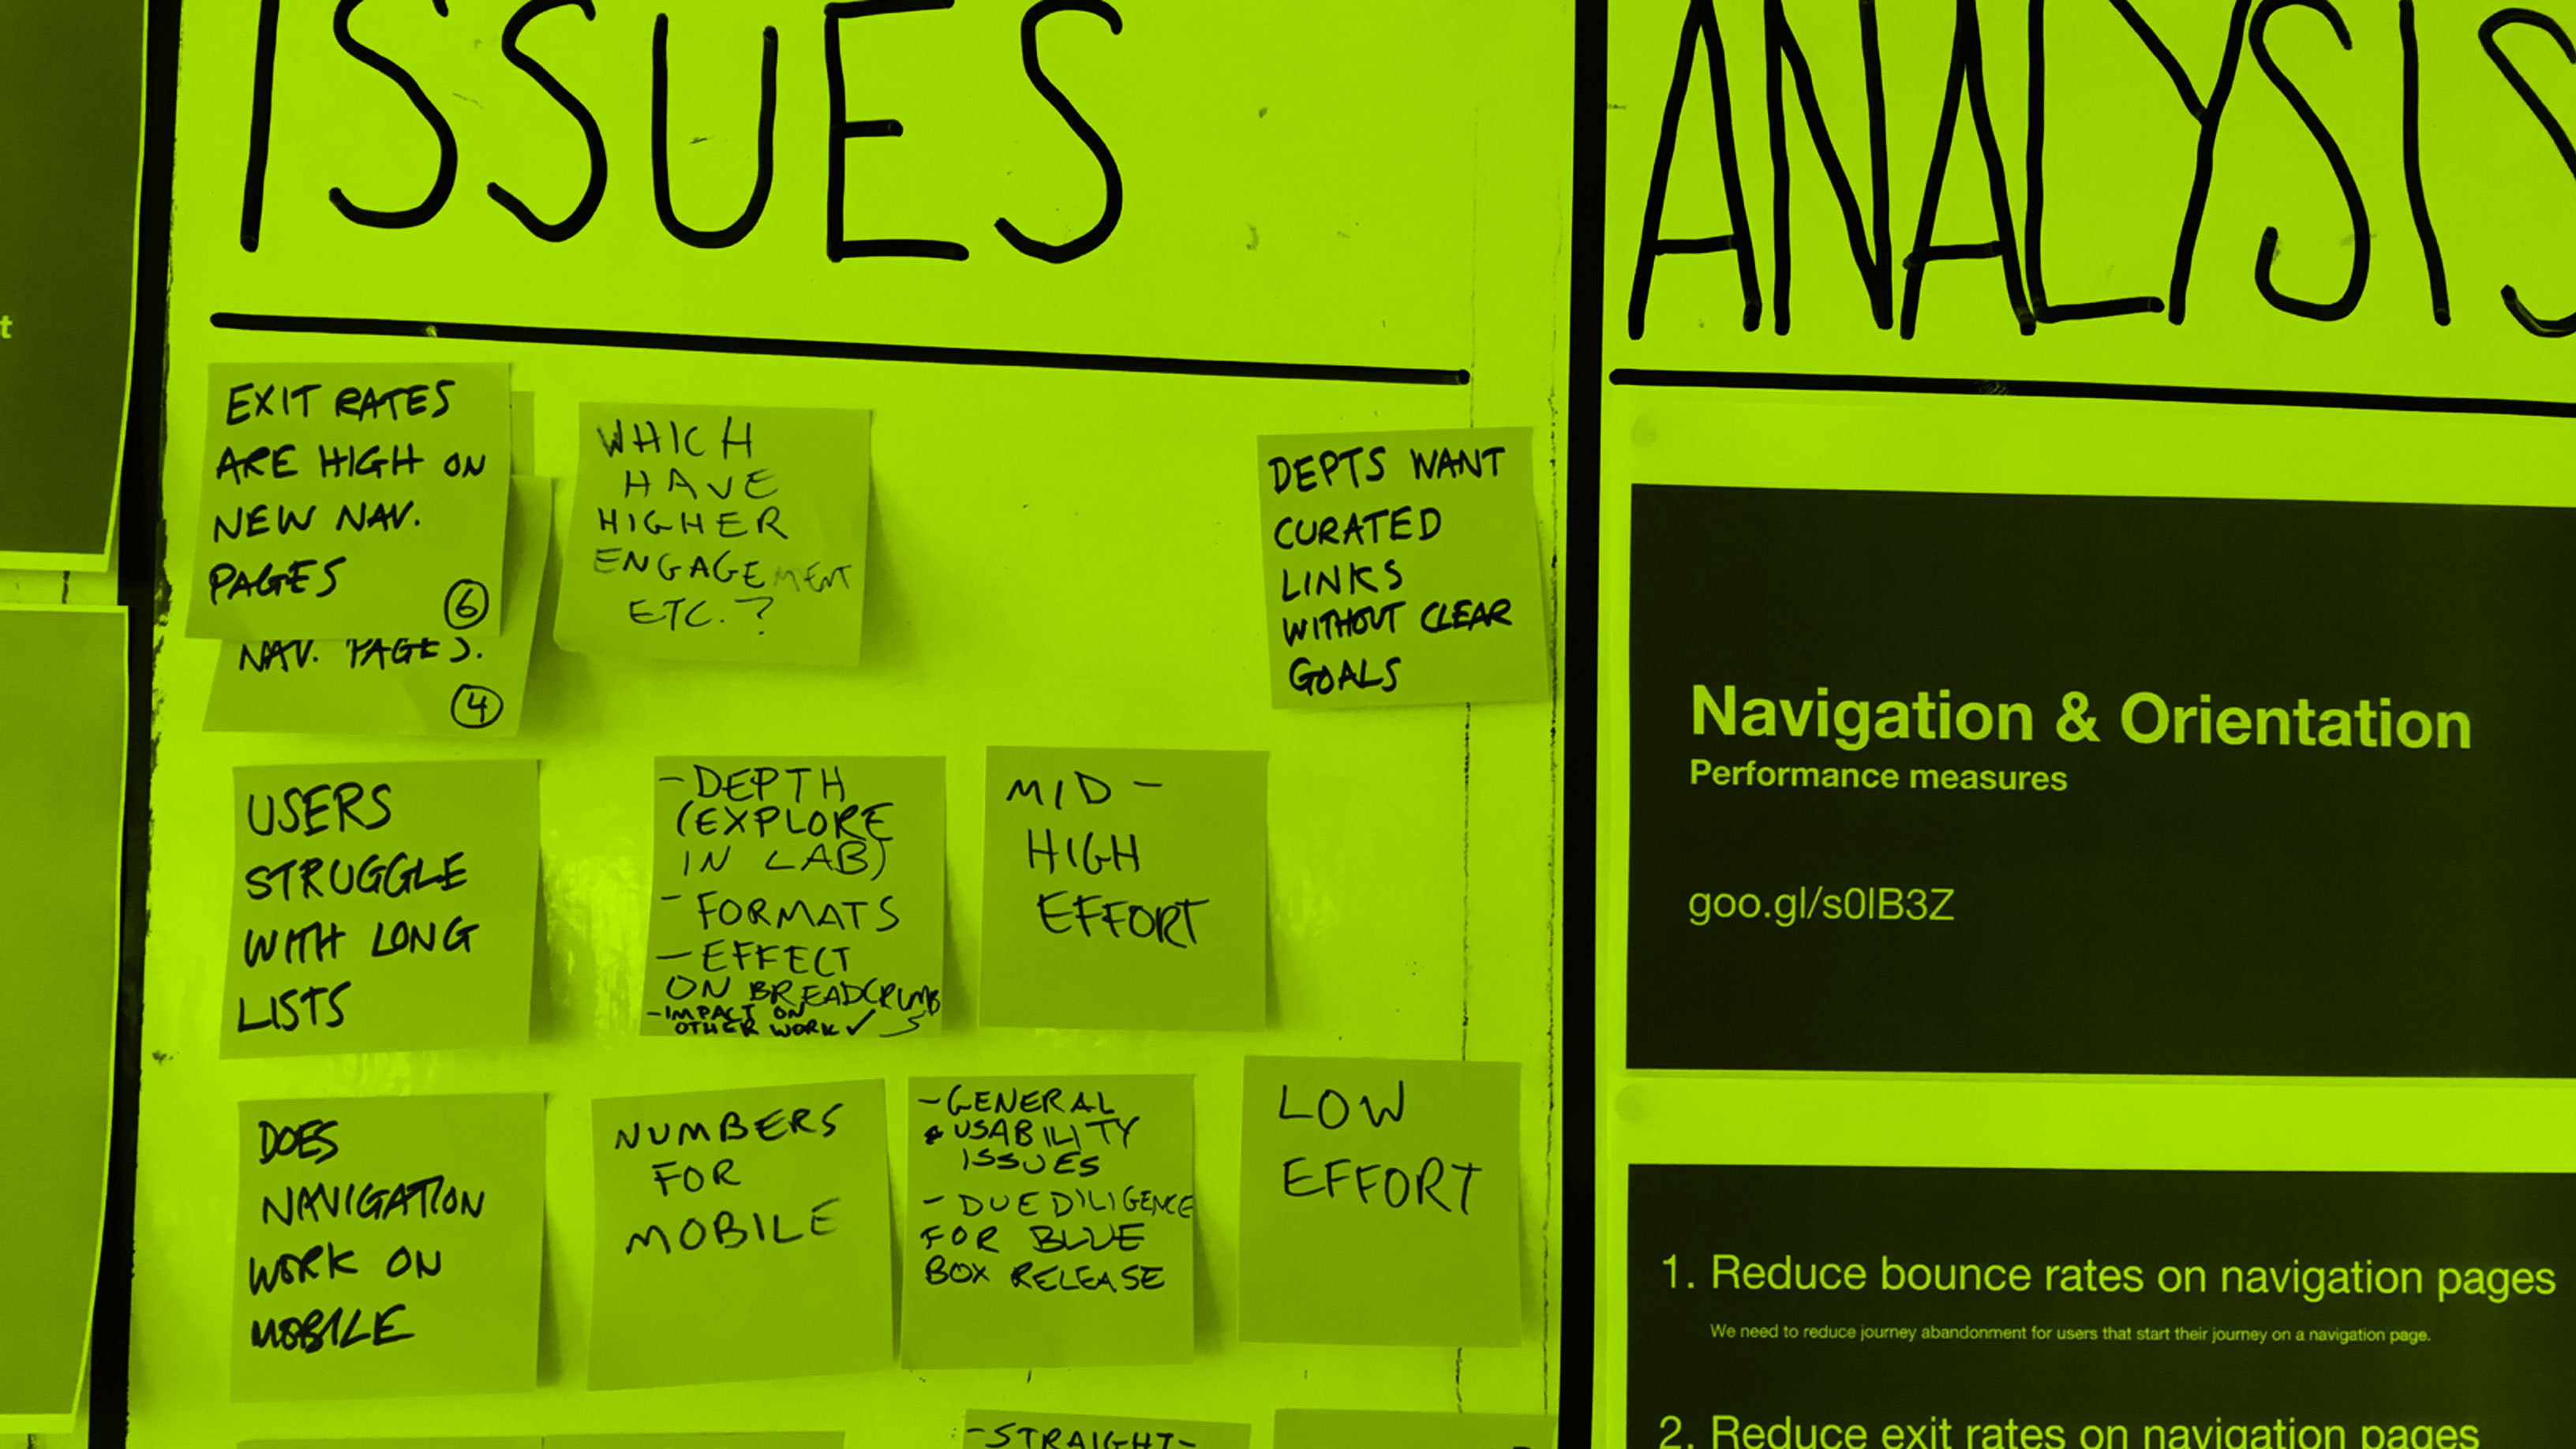 The issues column of the team wall with sticky notes showing the known issues